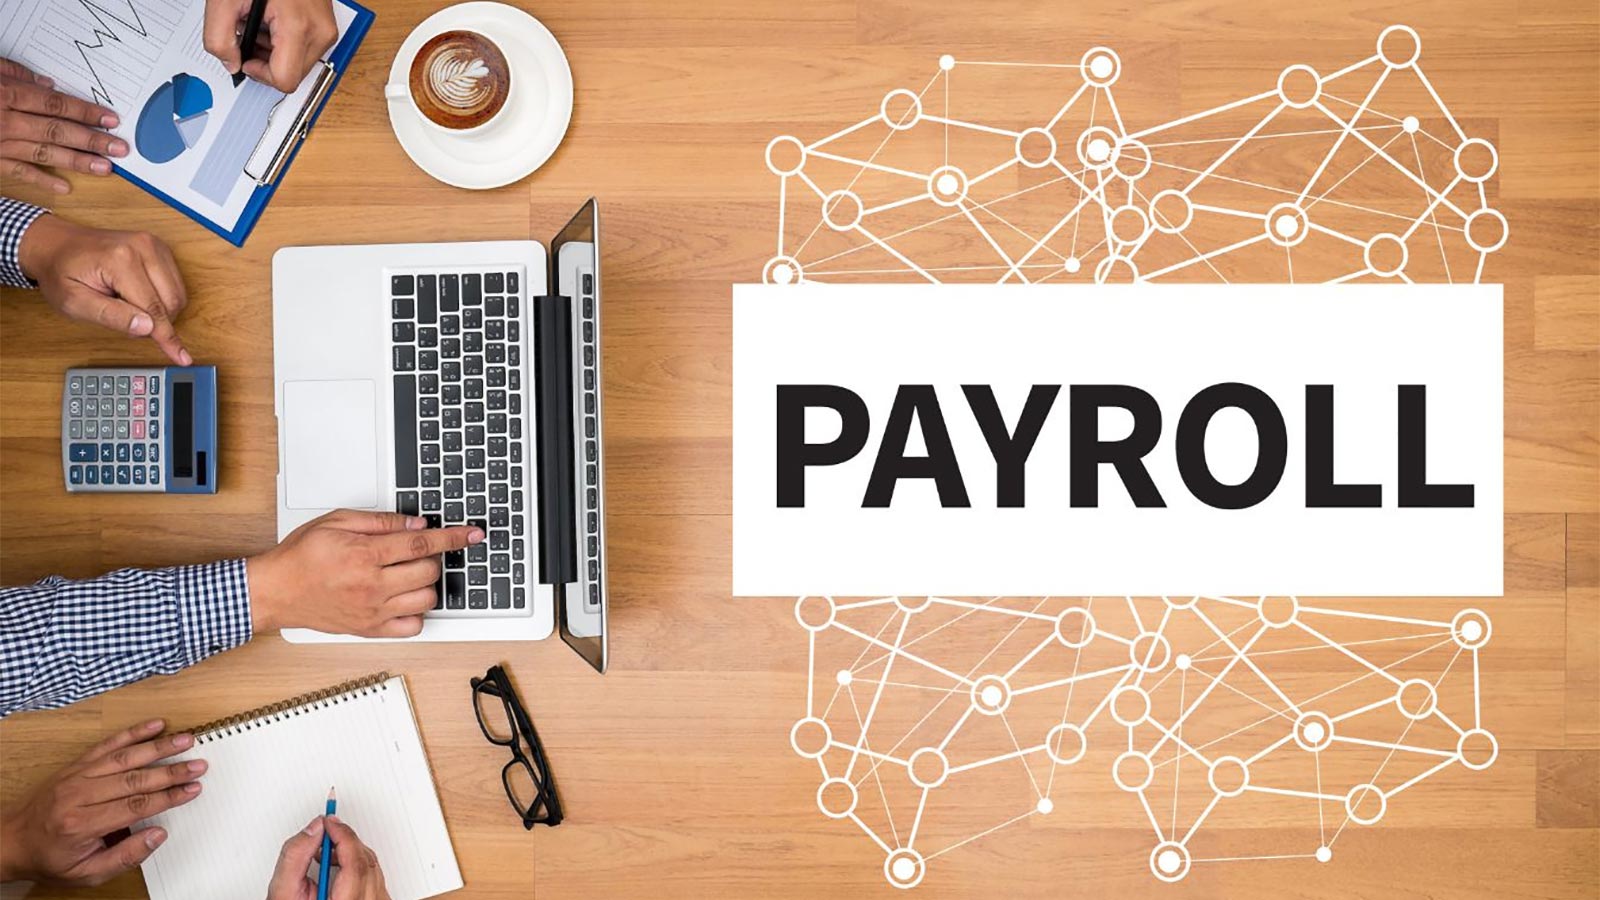 6 Tips on Starting Payroll Systems for Small Businesses